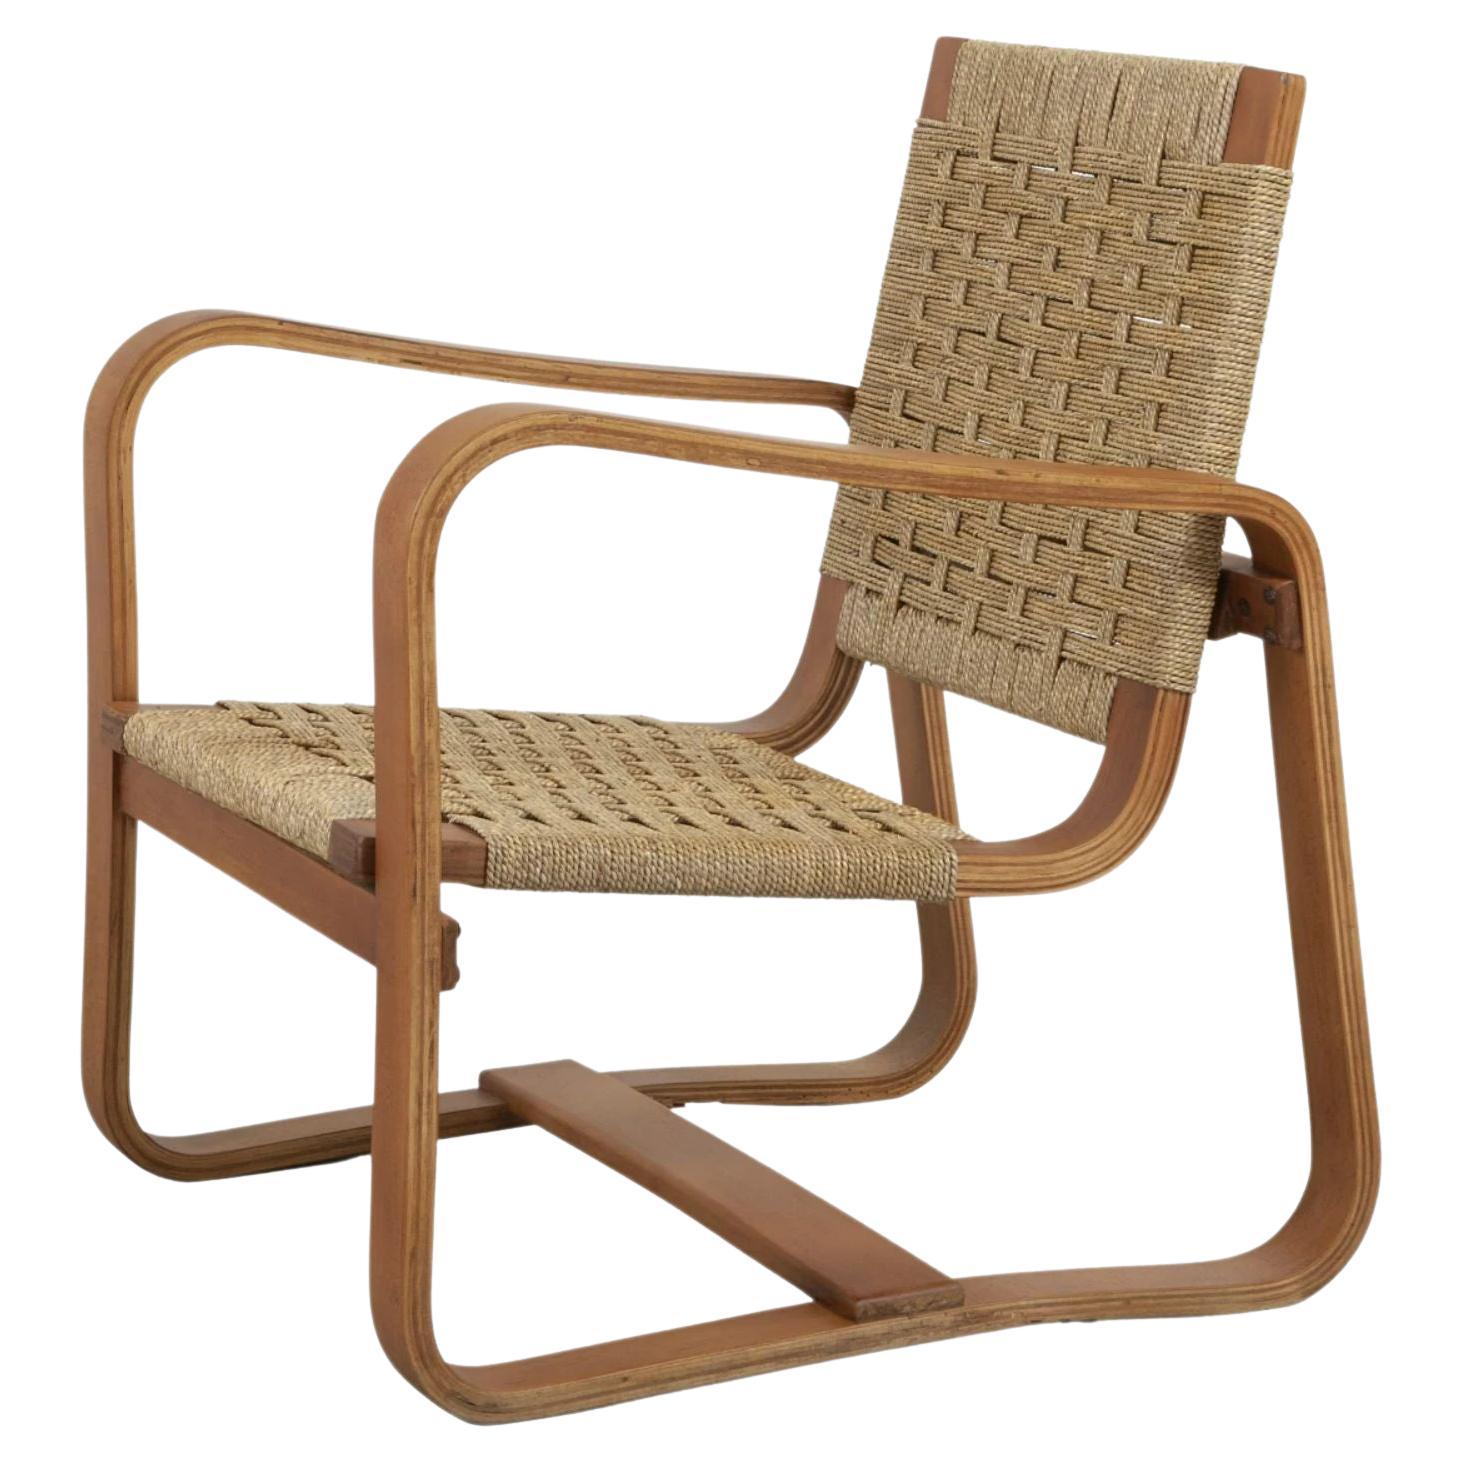 Bentwood Armchair by Giuseppe Pagano Pogatschnig and Gino Maggioni, 1942